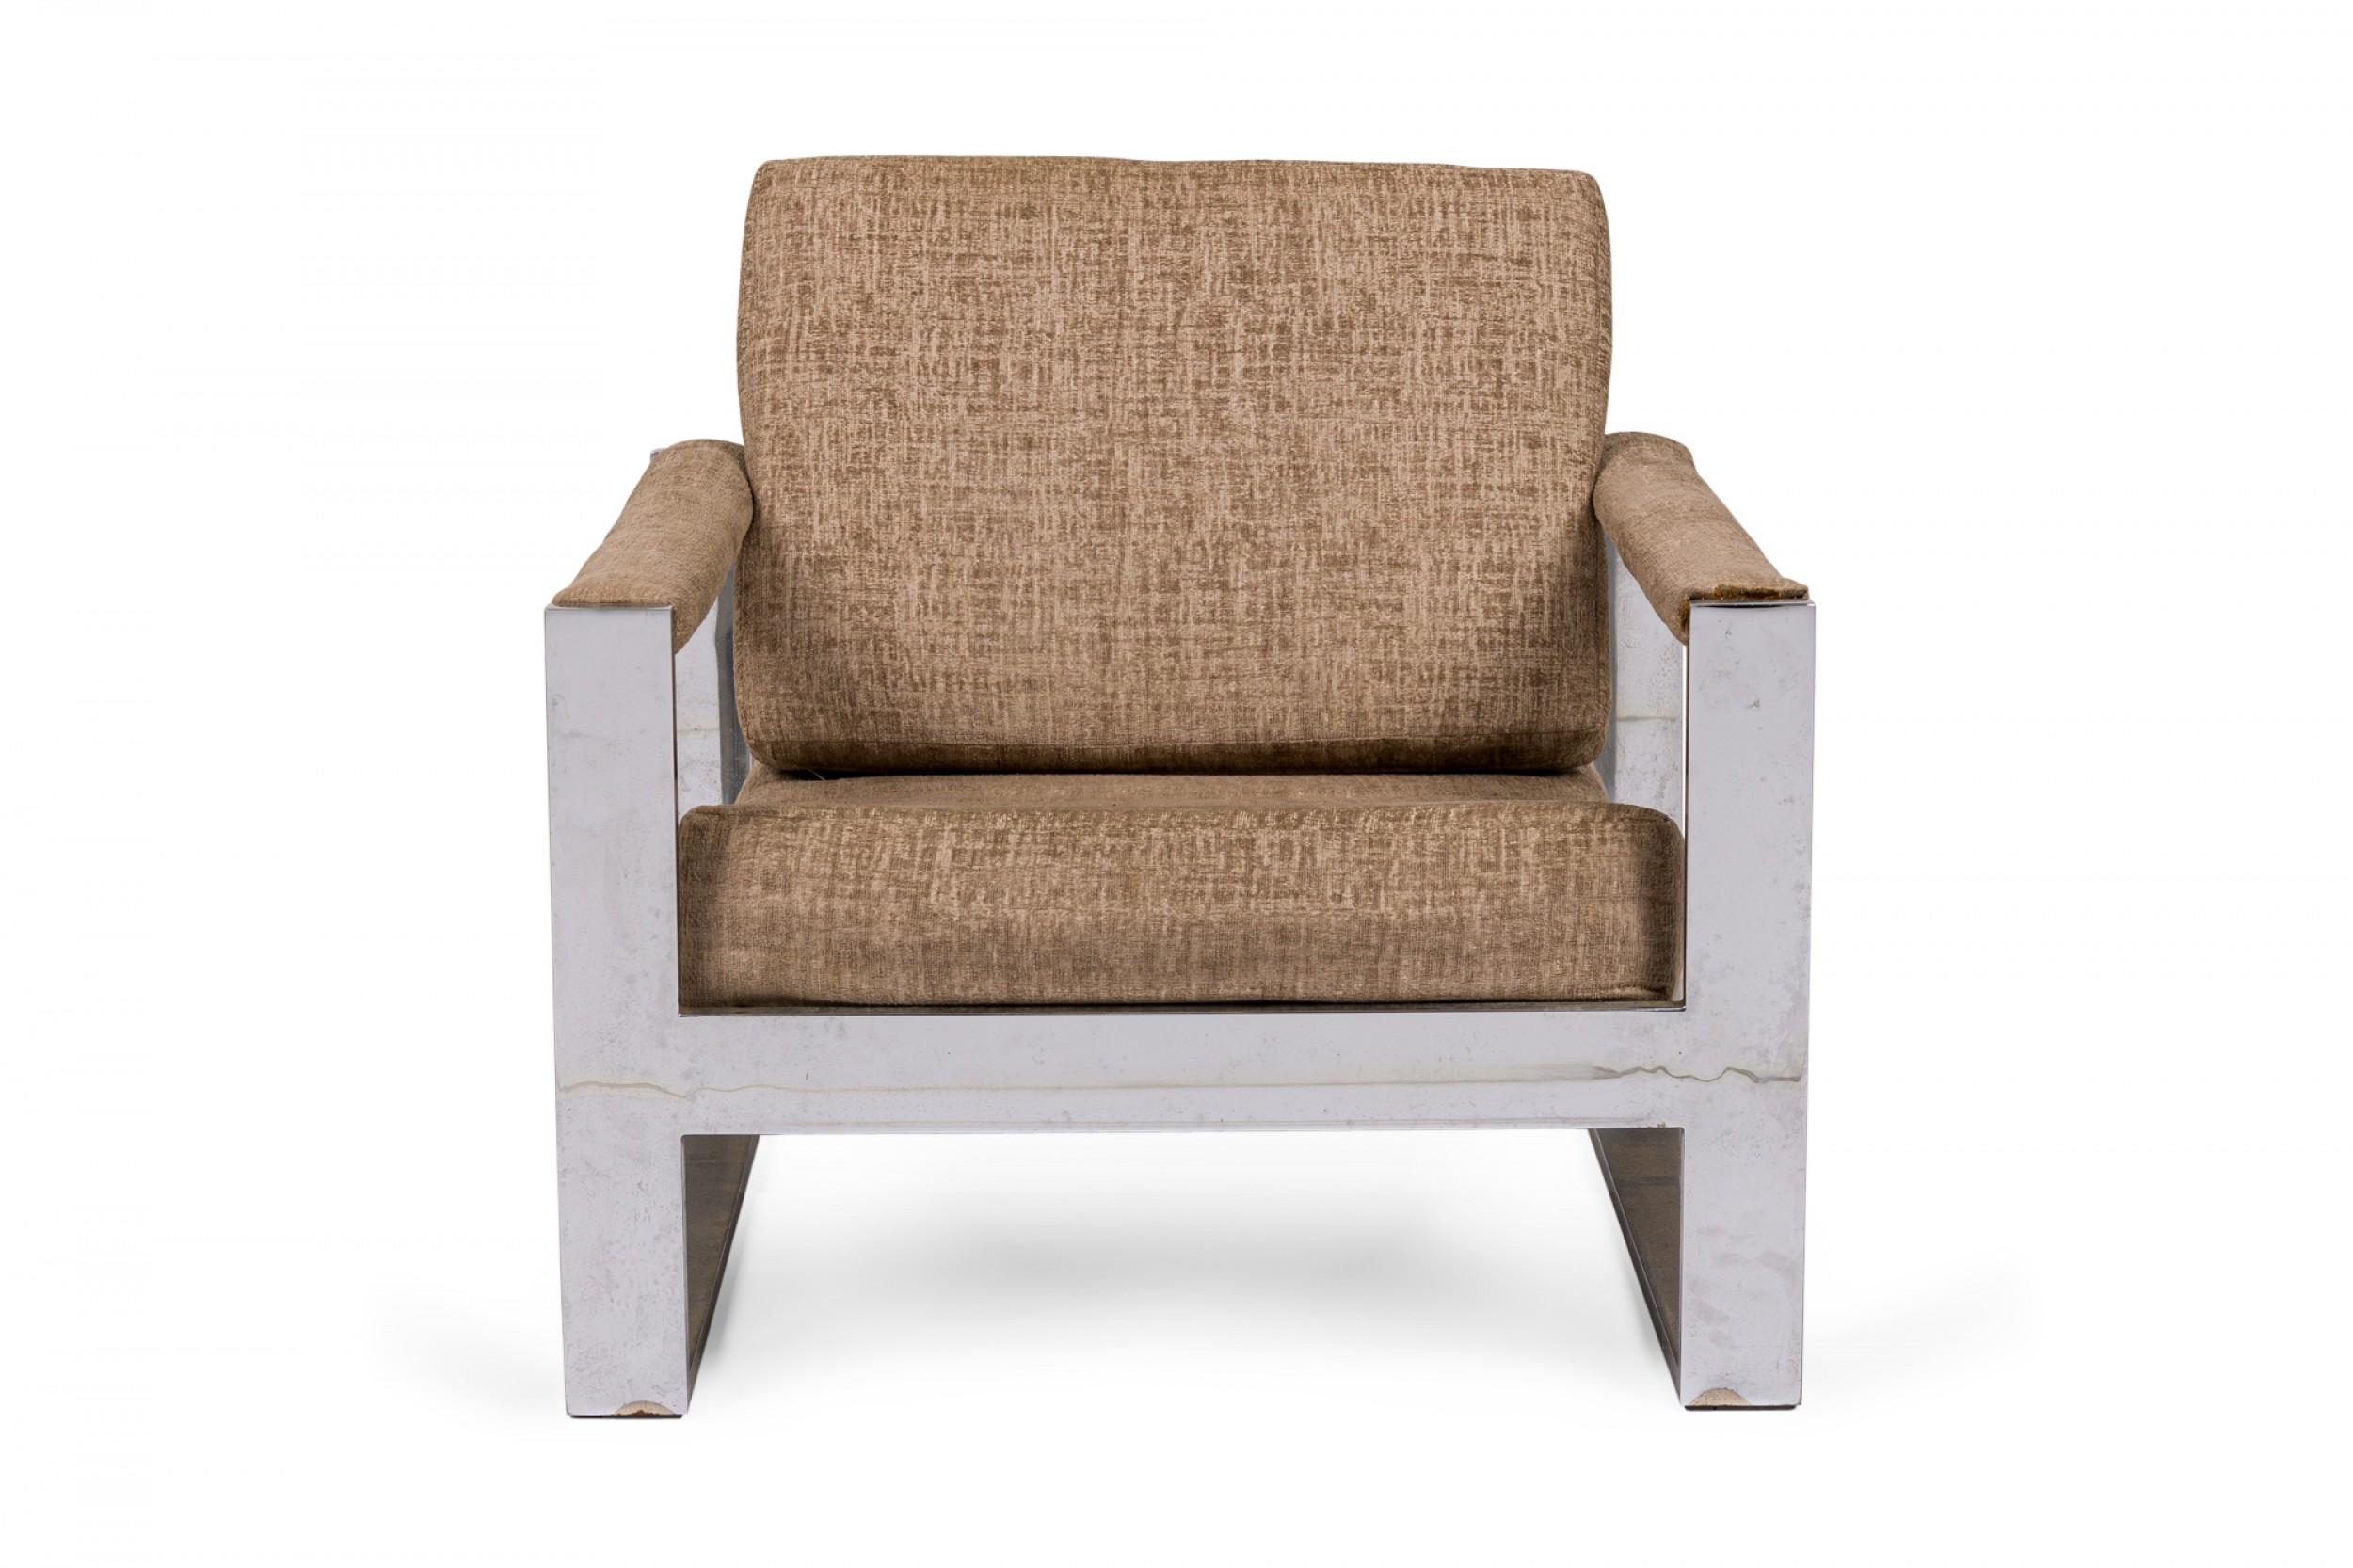 American Mid-Century 'Tank' form lounge / armchair with a flat bar polished chrome frame and textured light brown upholstered seat, back and arm covers. (MILO BAUGHMAN).
 